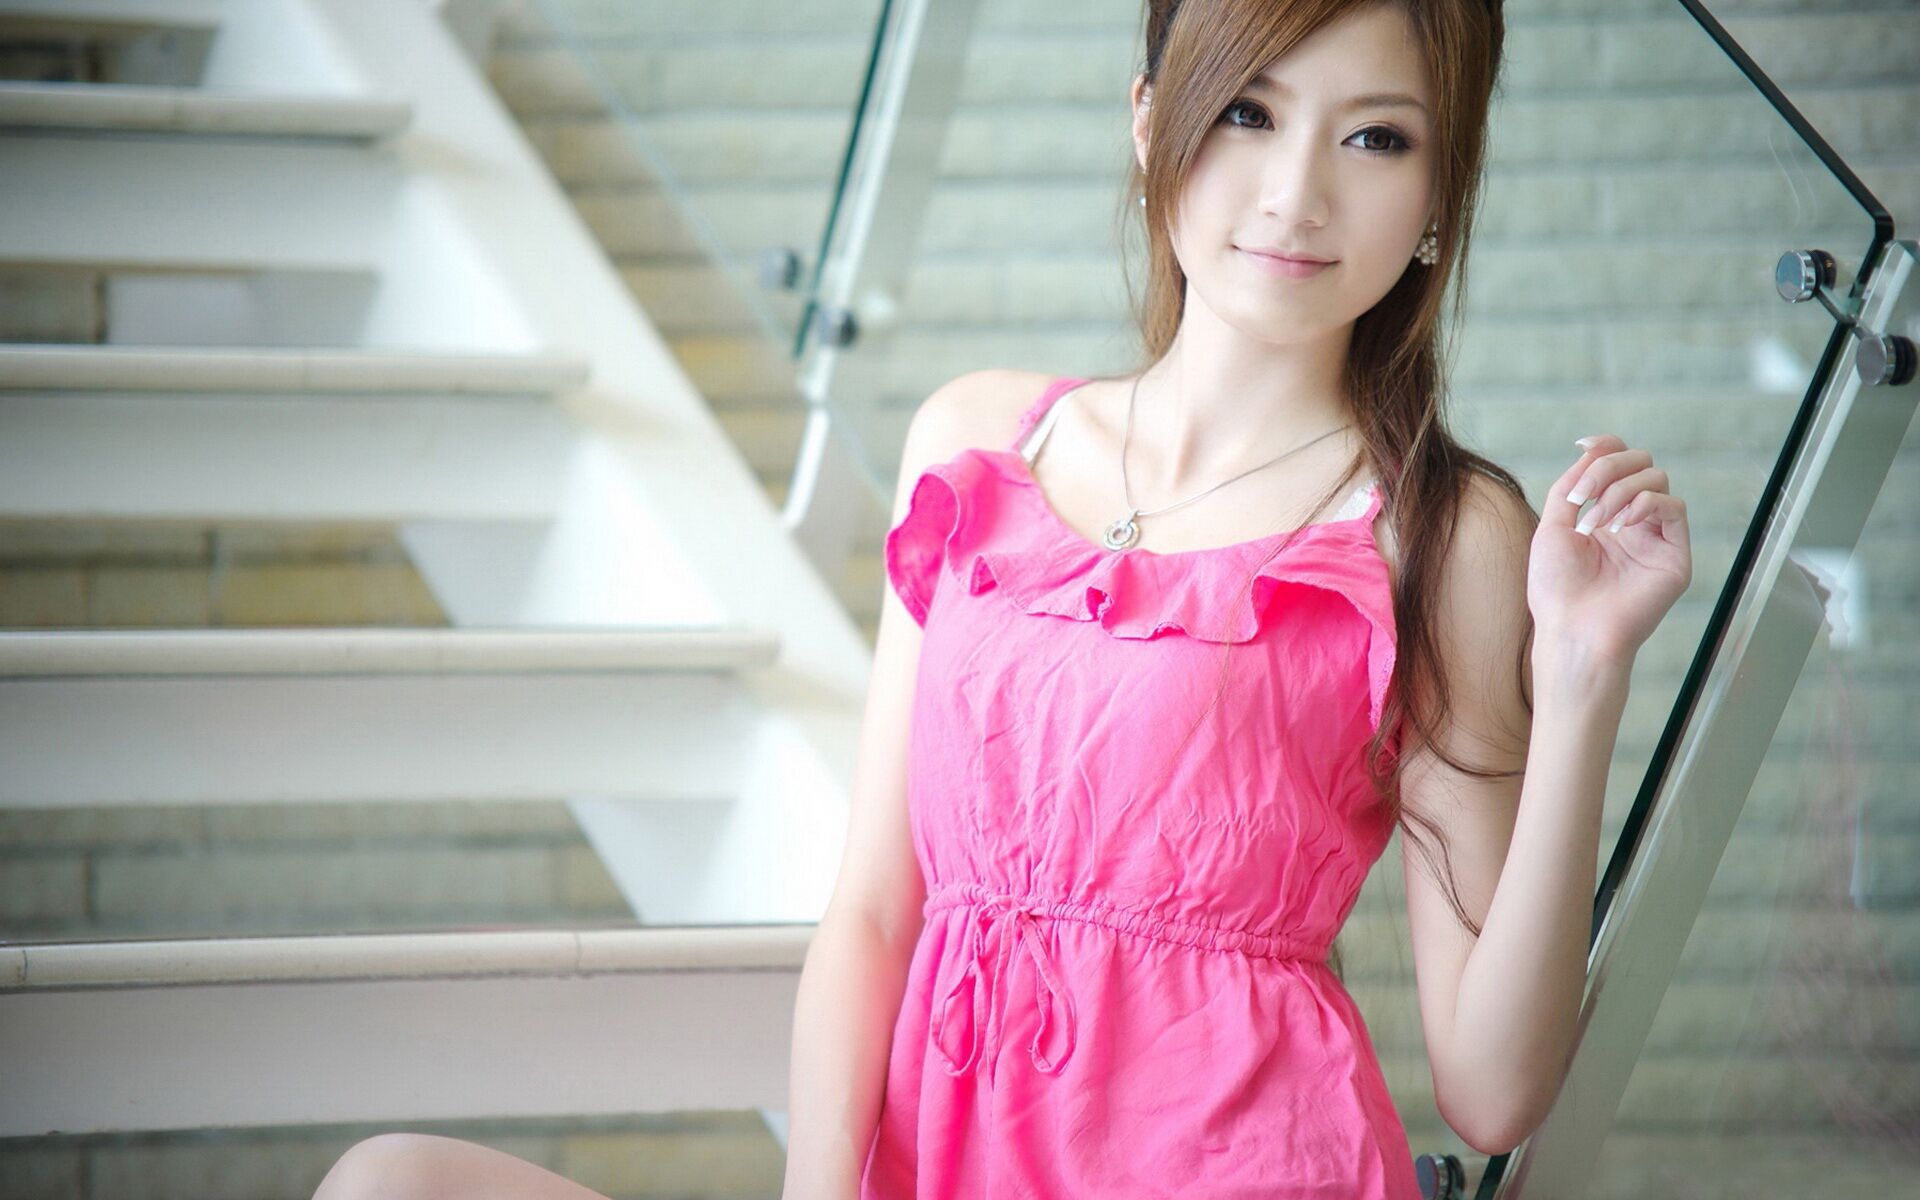 Asian Pink Dress Long Nails Looking Away Stairs 1920x1200